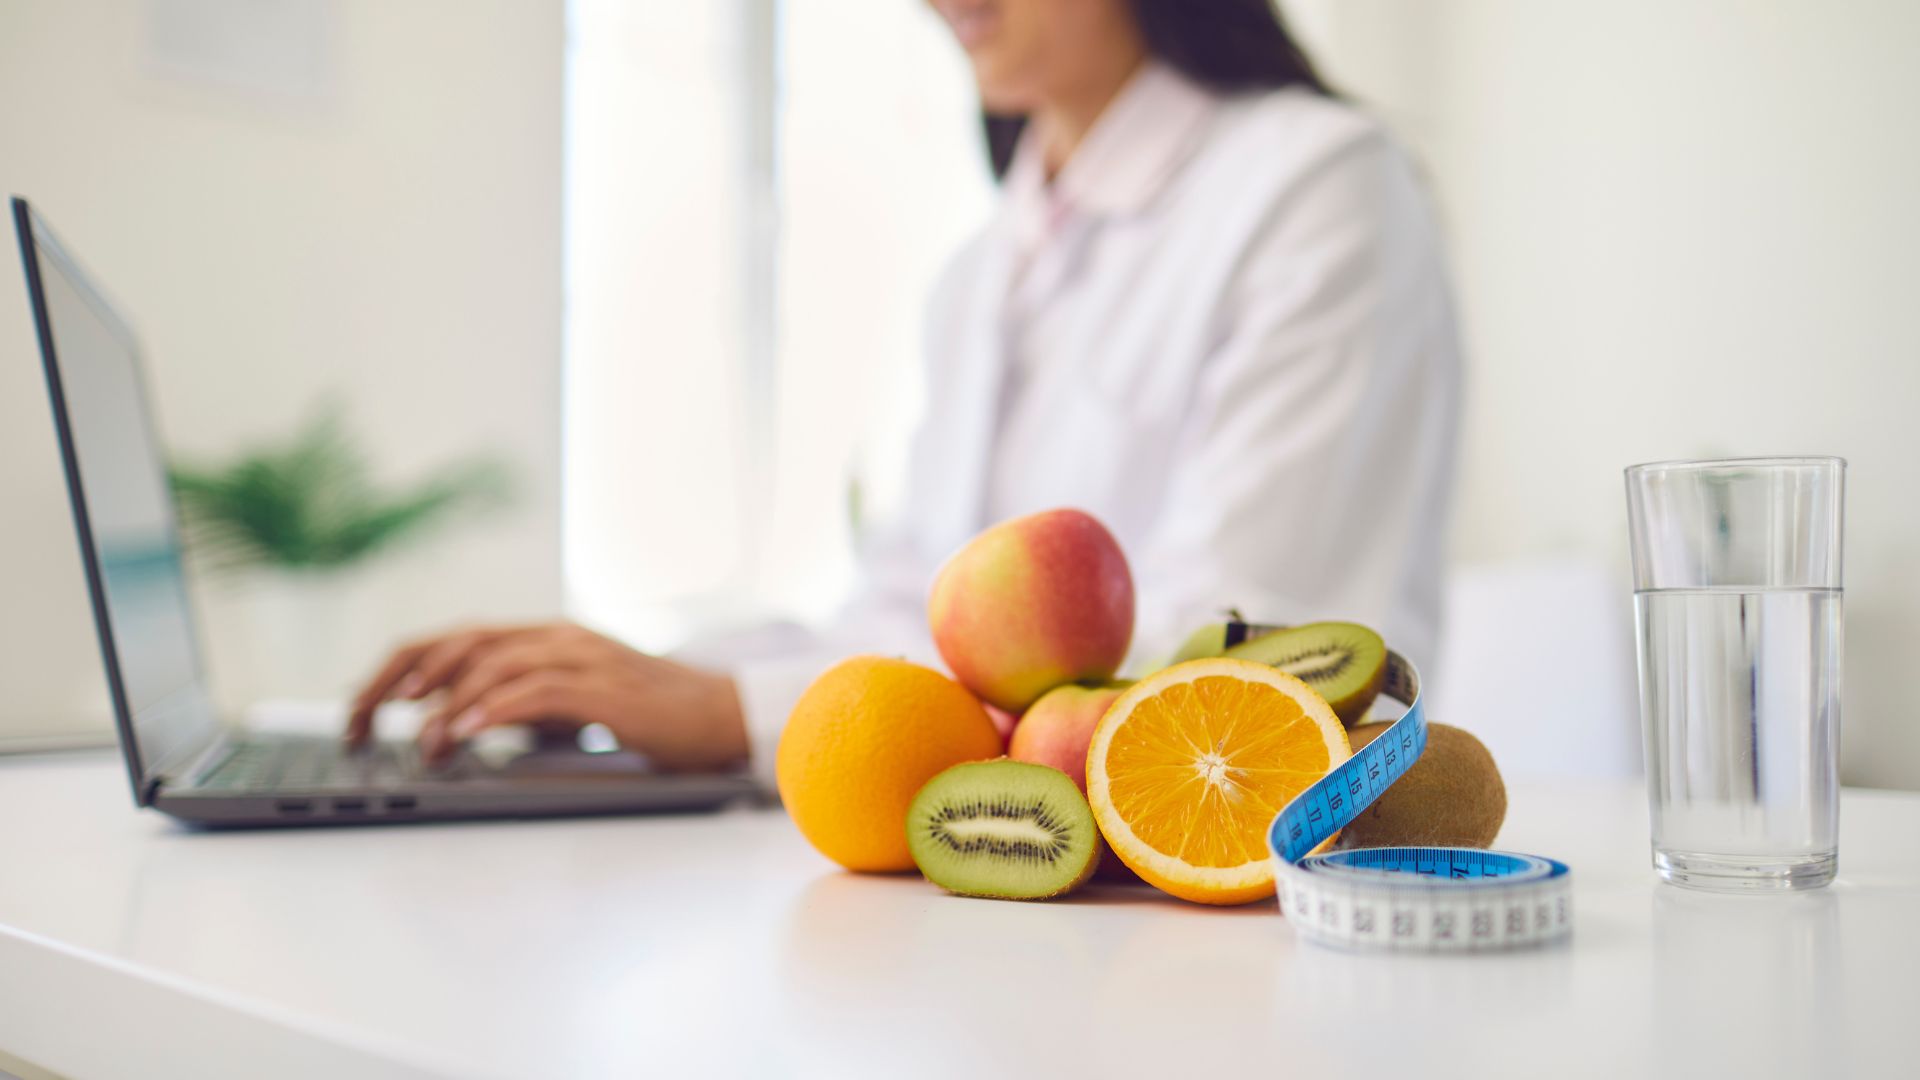 Get lifestyle tips on productivity from a woman sitting at a desk with fruit and a laptop.